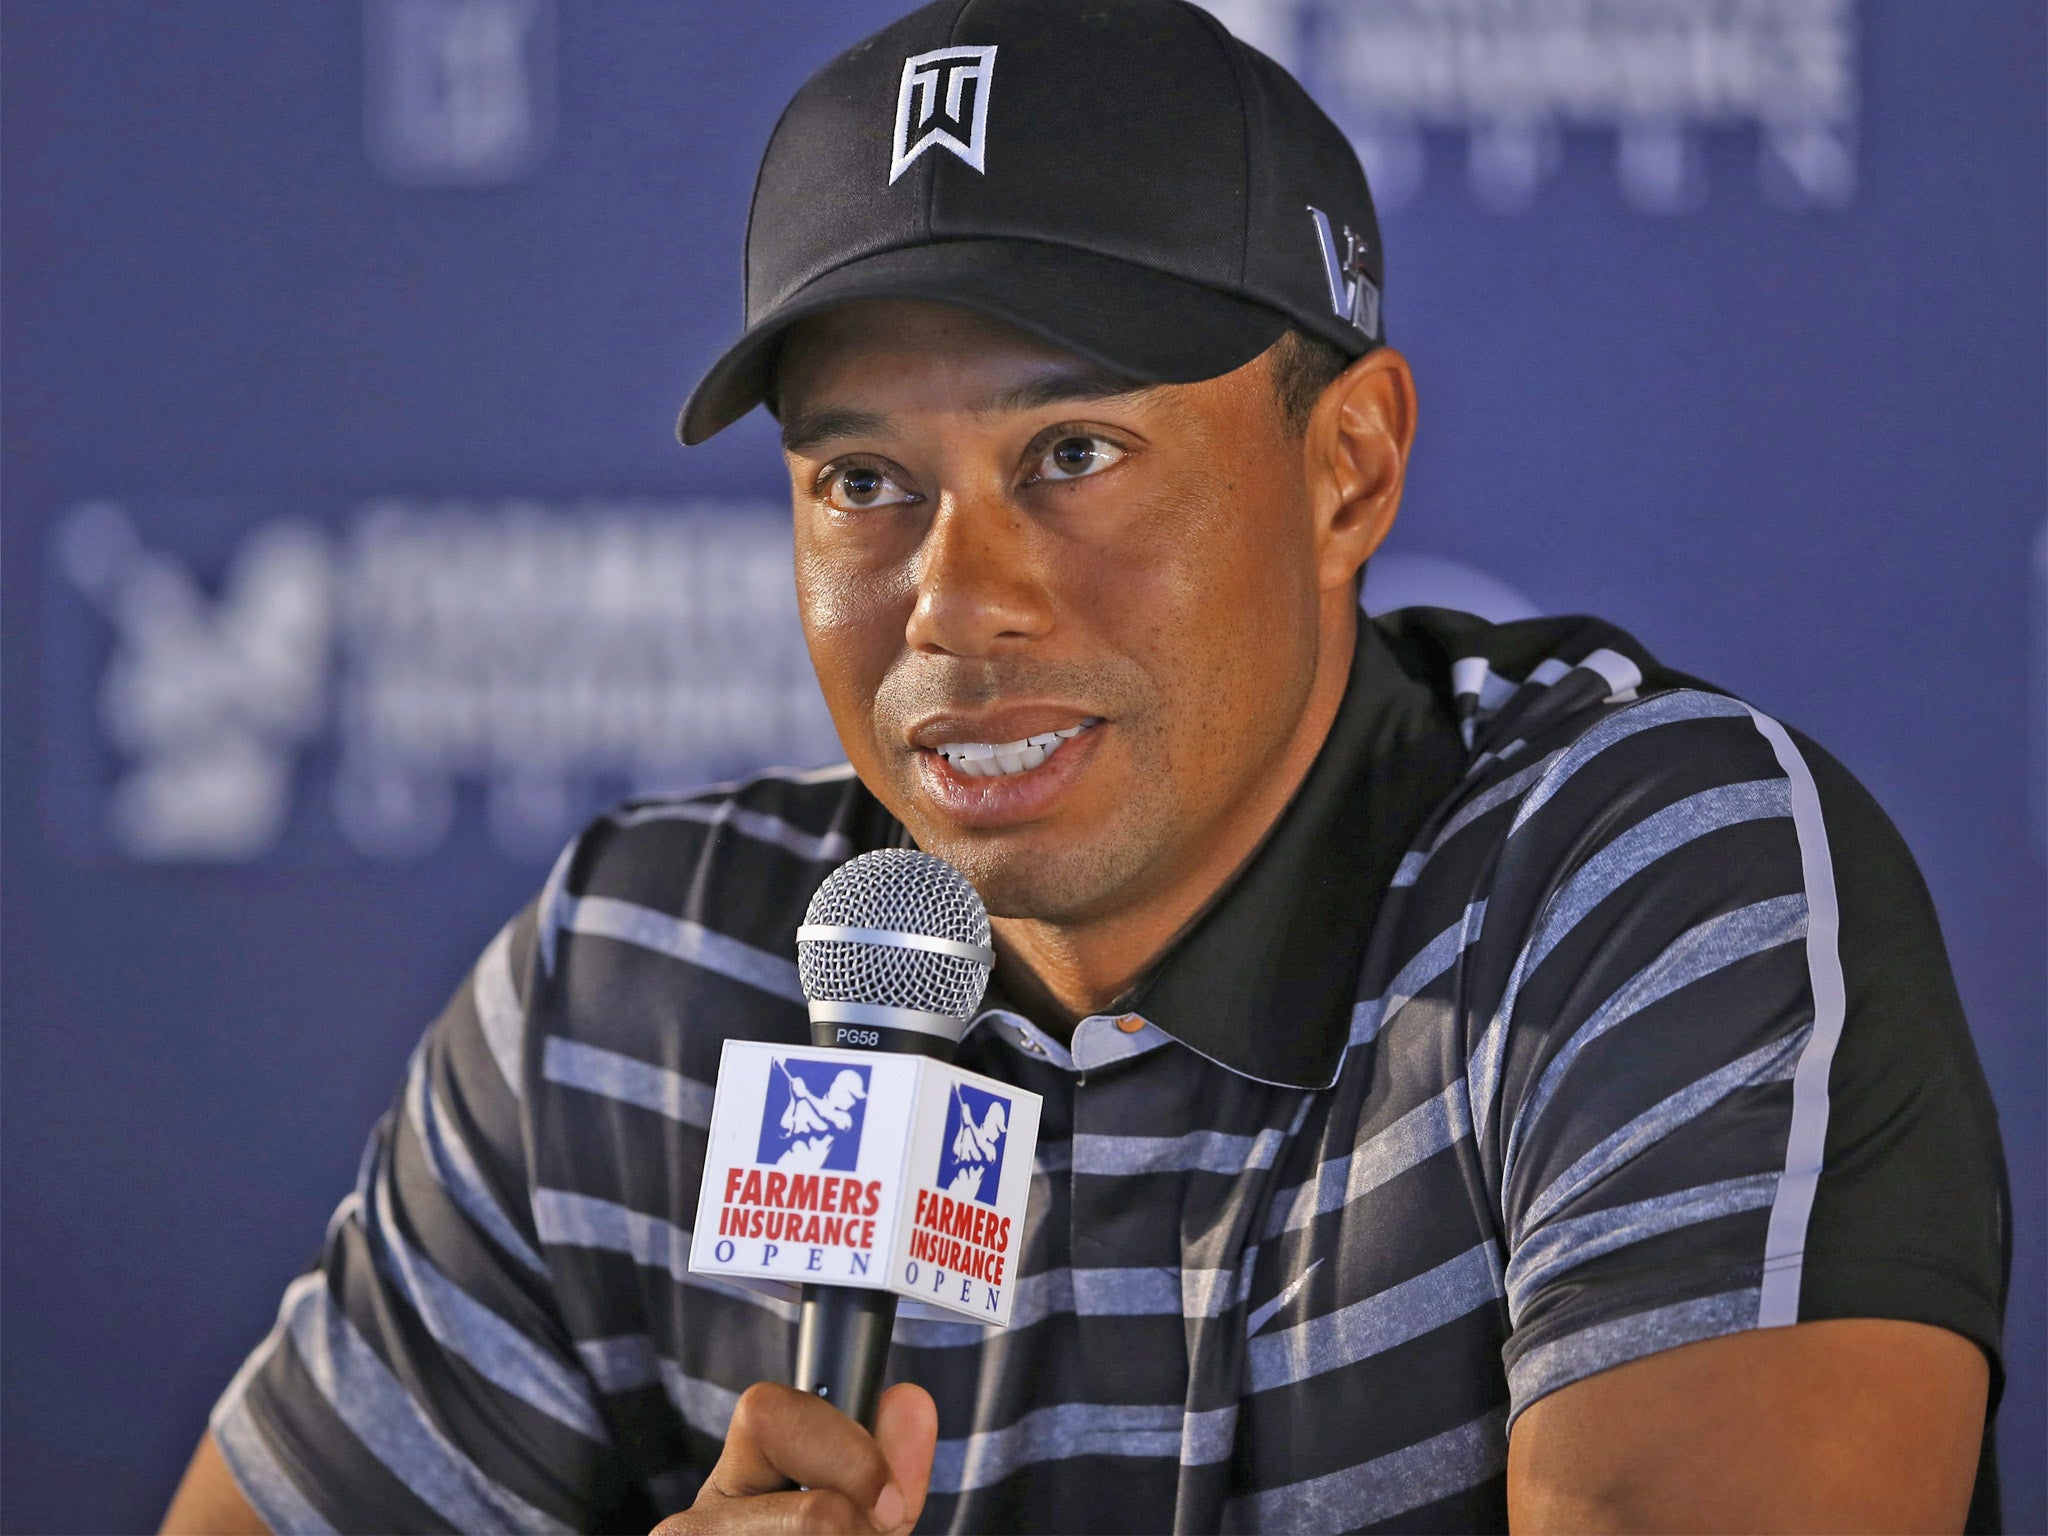 Tiger Woods speaks during a news conference at the Farmers Insurance Open in San Diego